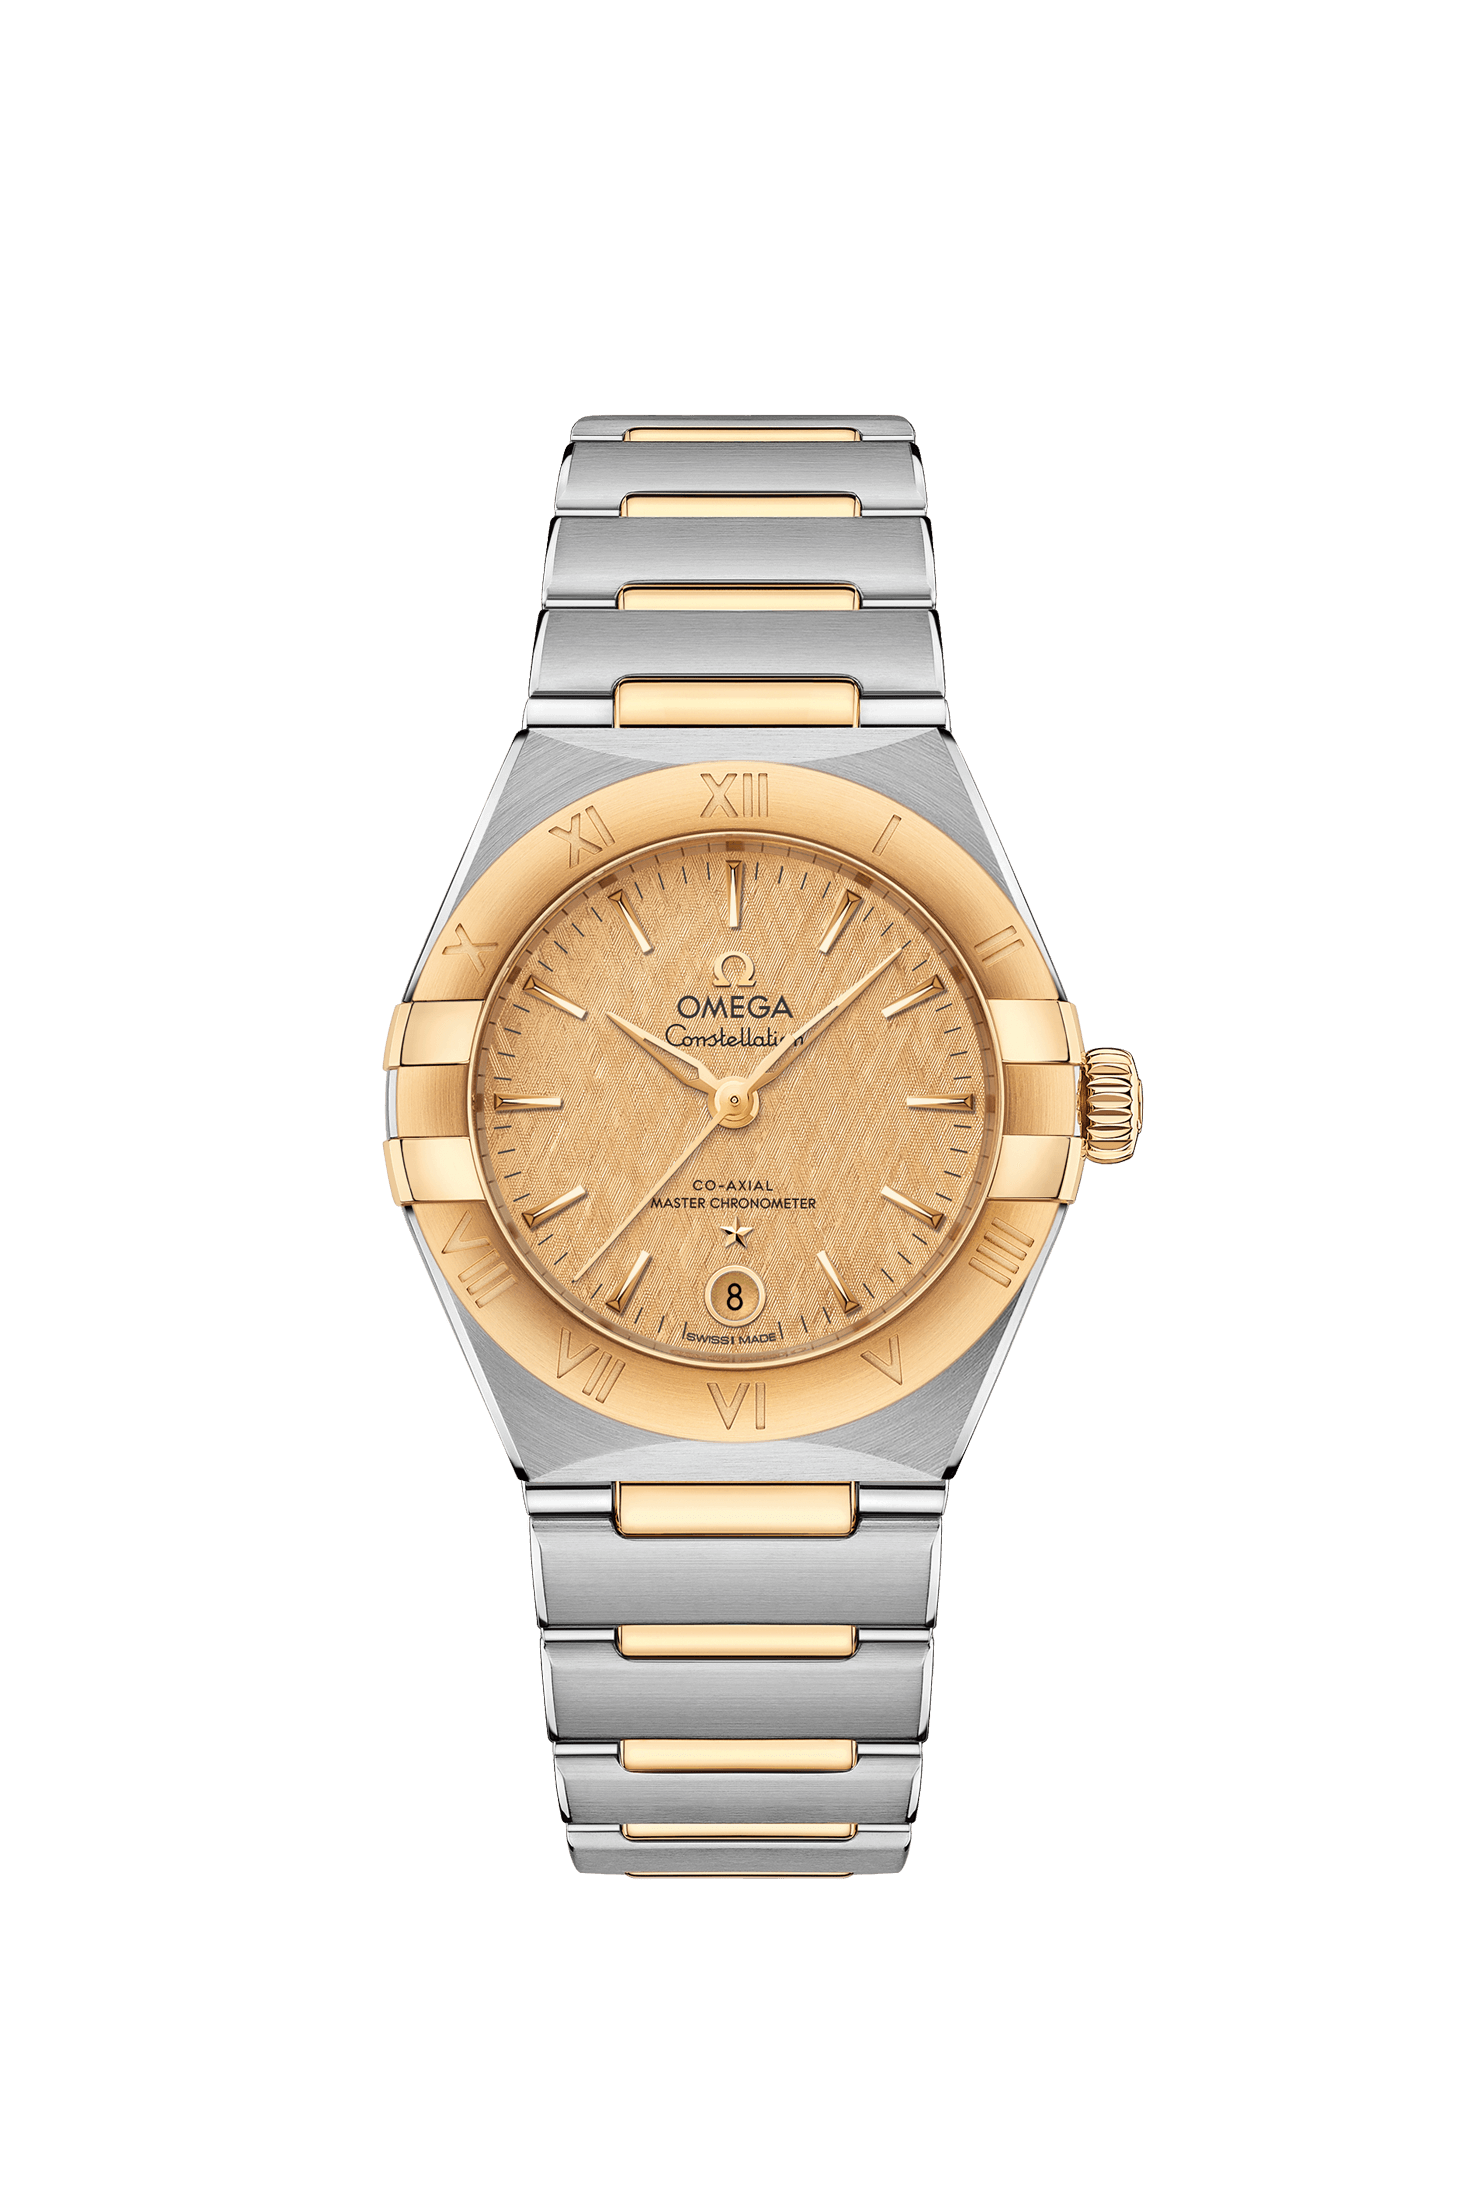 Ladies' watch  OMEGA, Constellation Co Axial Master Chronometer / 29mm, SKU: 131.20.29.20.08.001 | watchphilosophy.co.uk